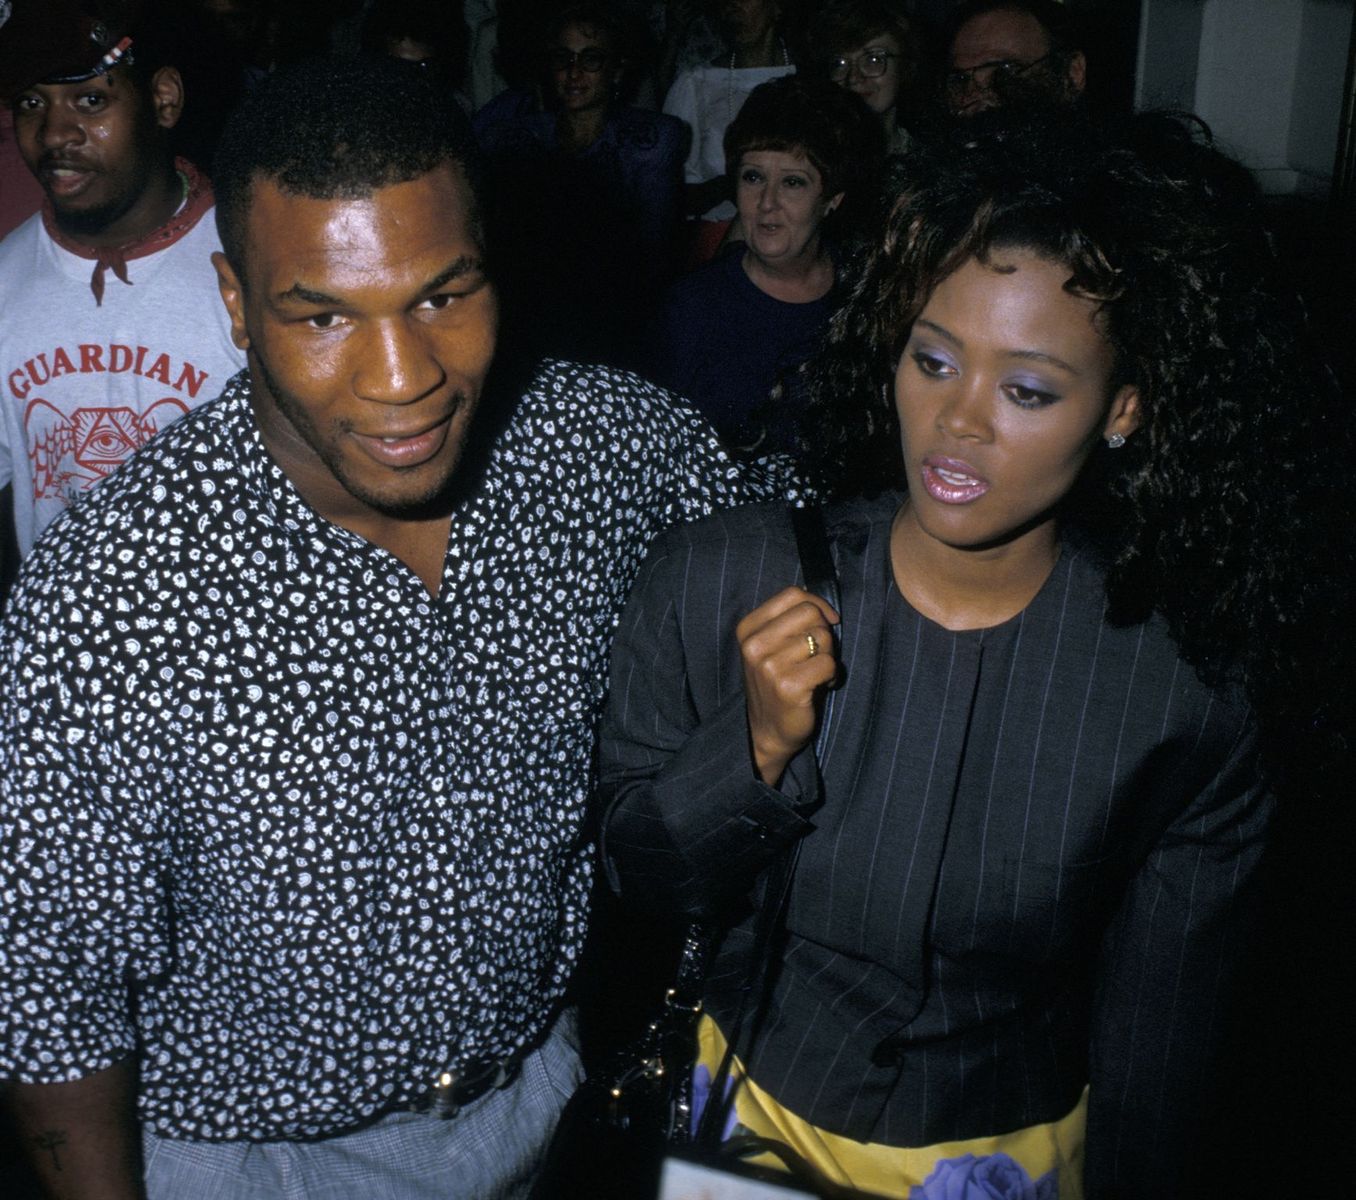 Mike Tyson and Robin Givens attend the opening of 'Speed the Plow' on July 15, 1988 at the Royale Theater in New York City. | Photo: Getty Images